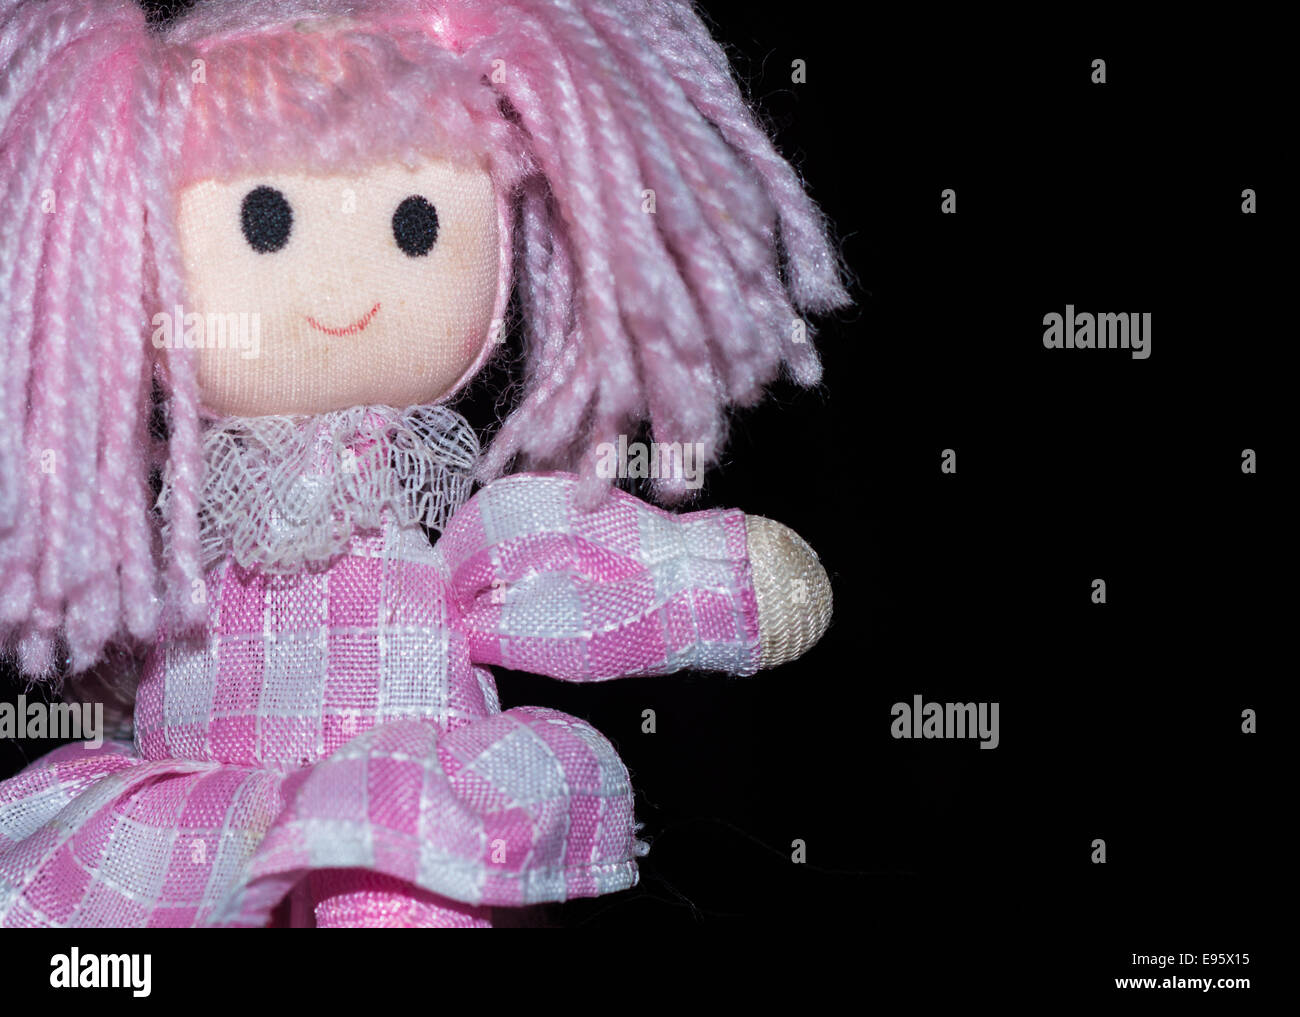 Pink patchwork wool doll pen pointing on a plain black background. Stock Photo